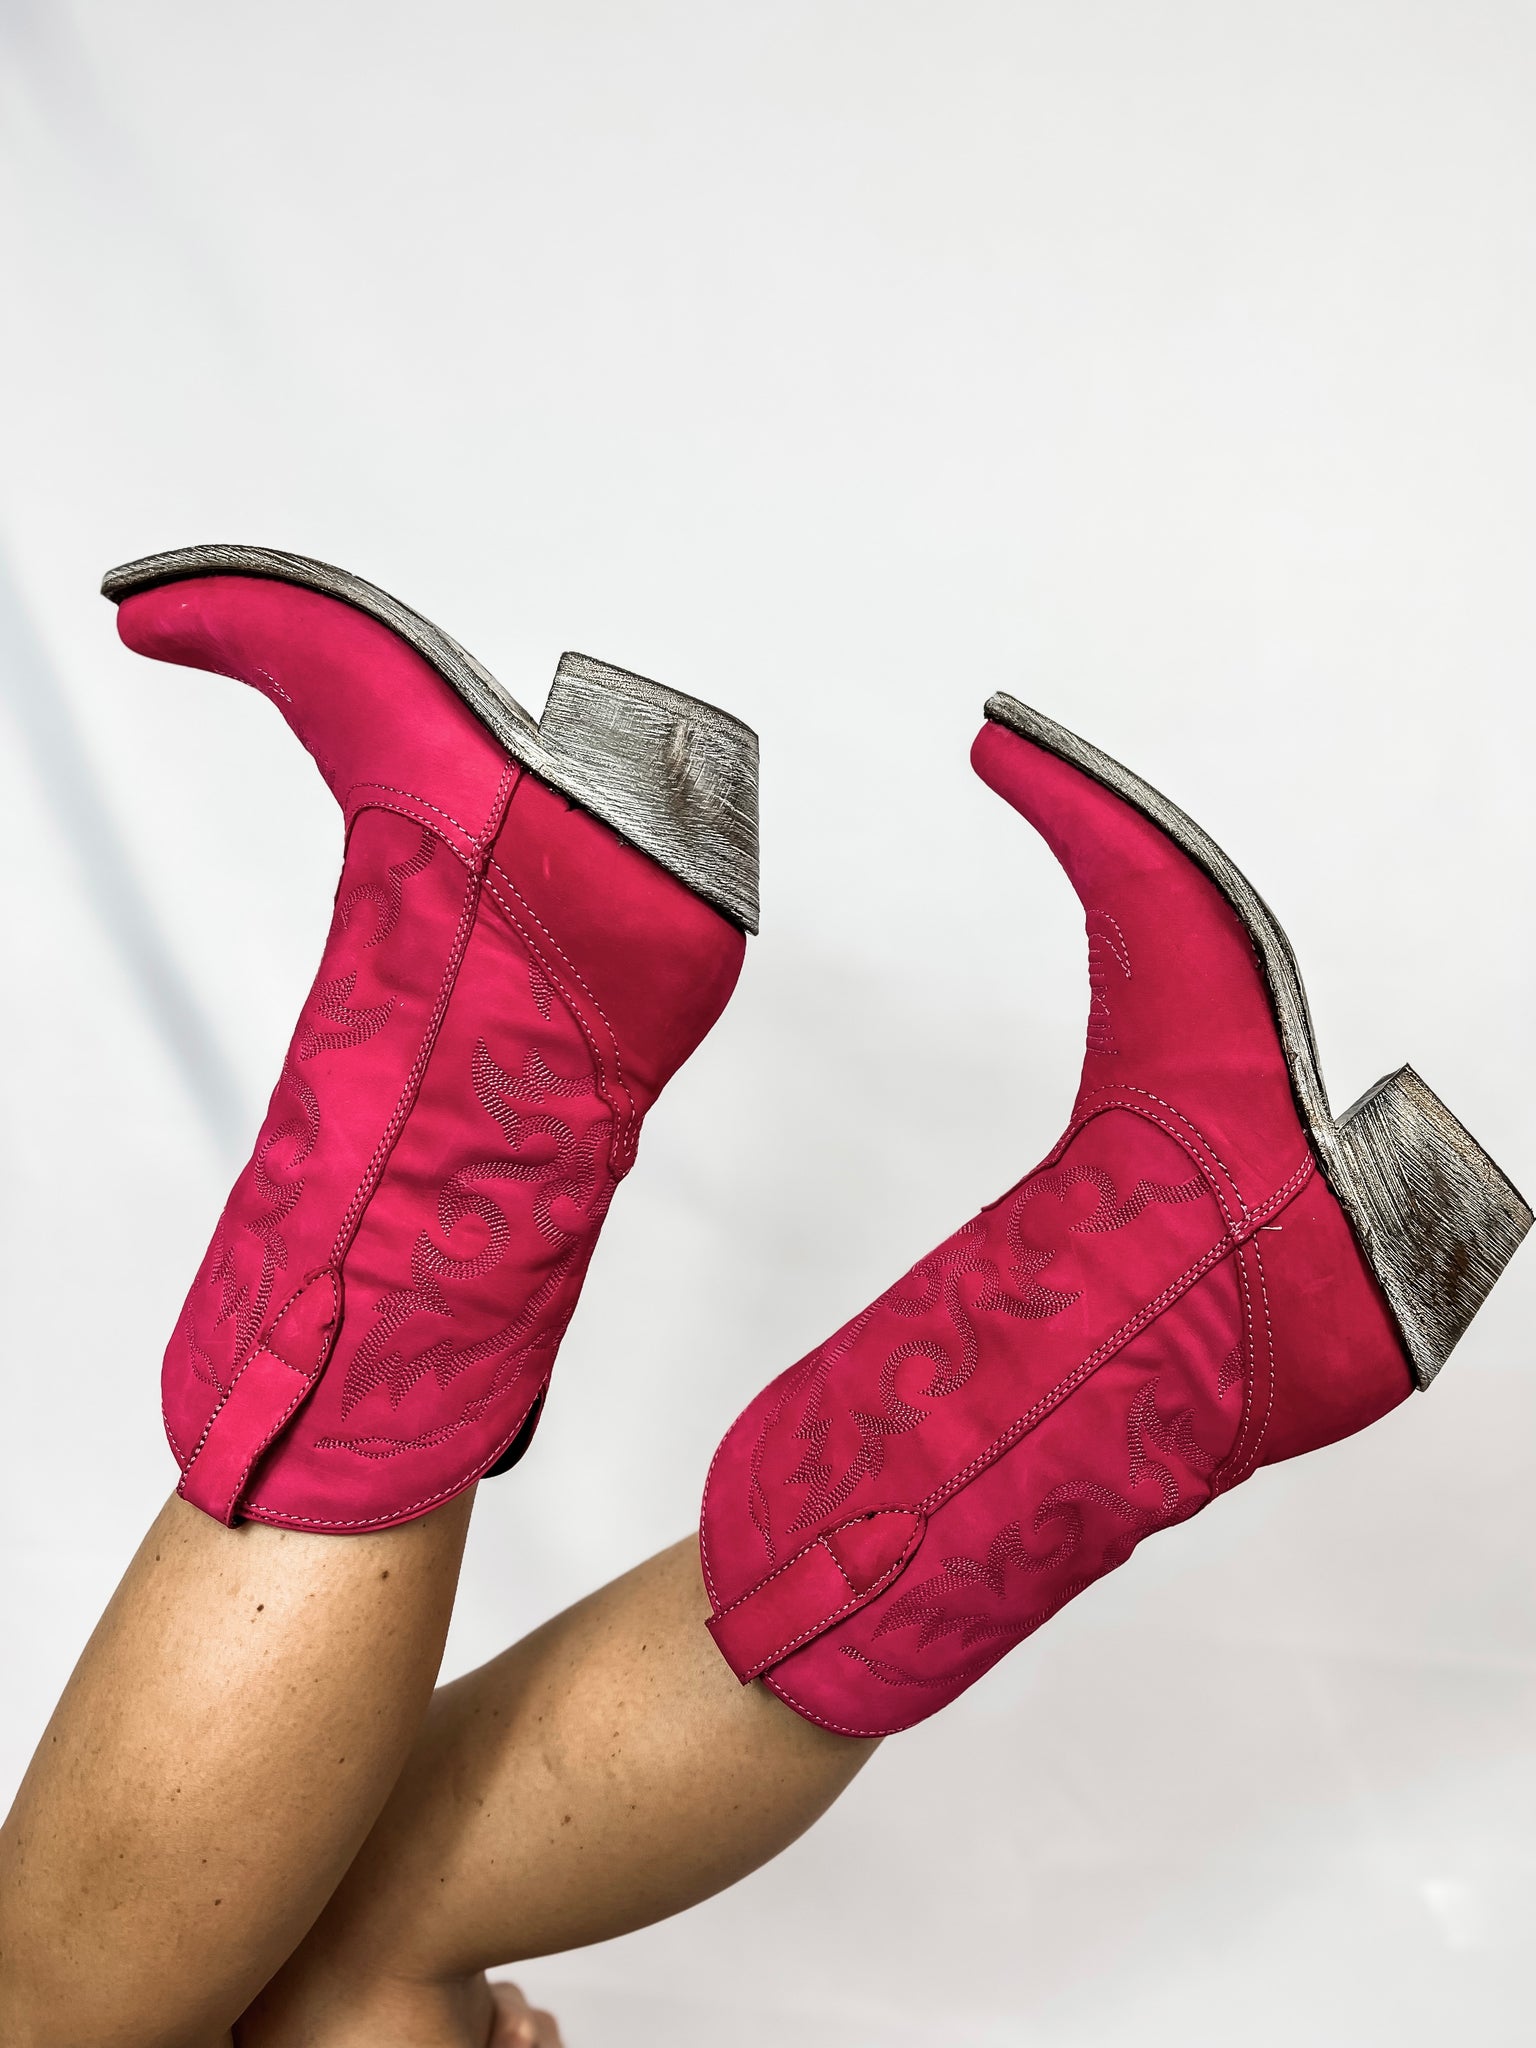 The Pink Panche Boot